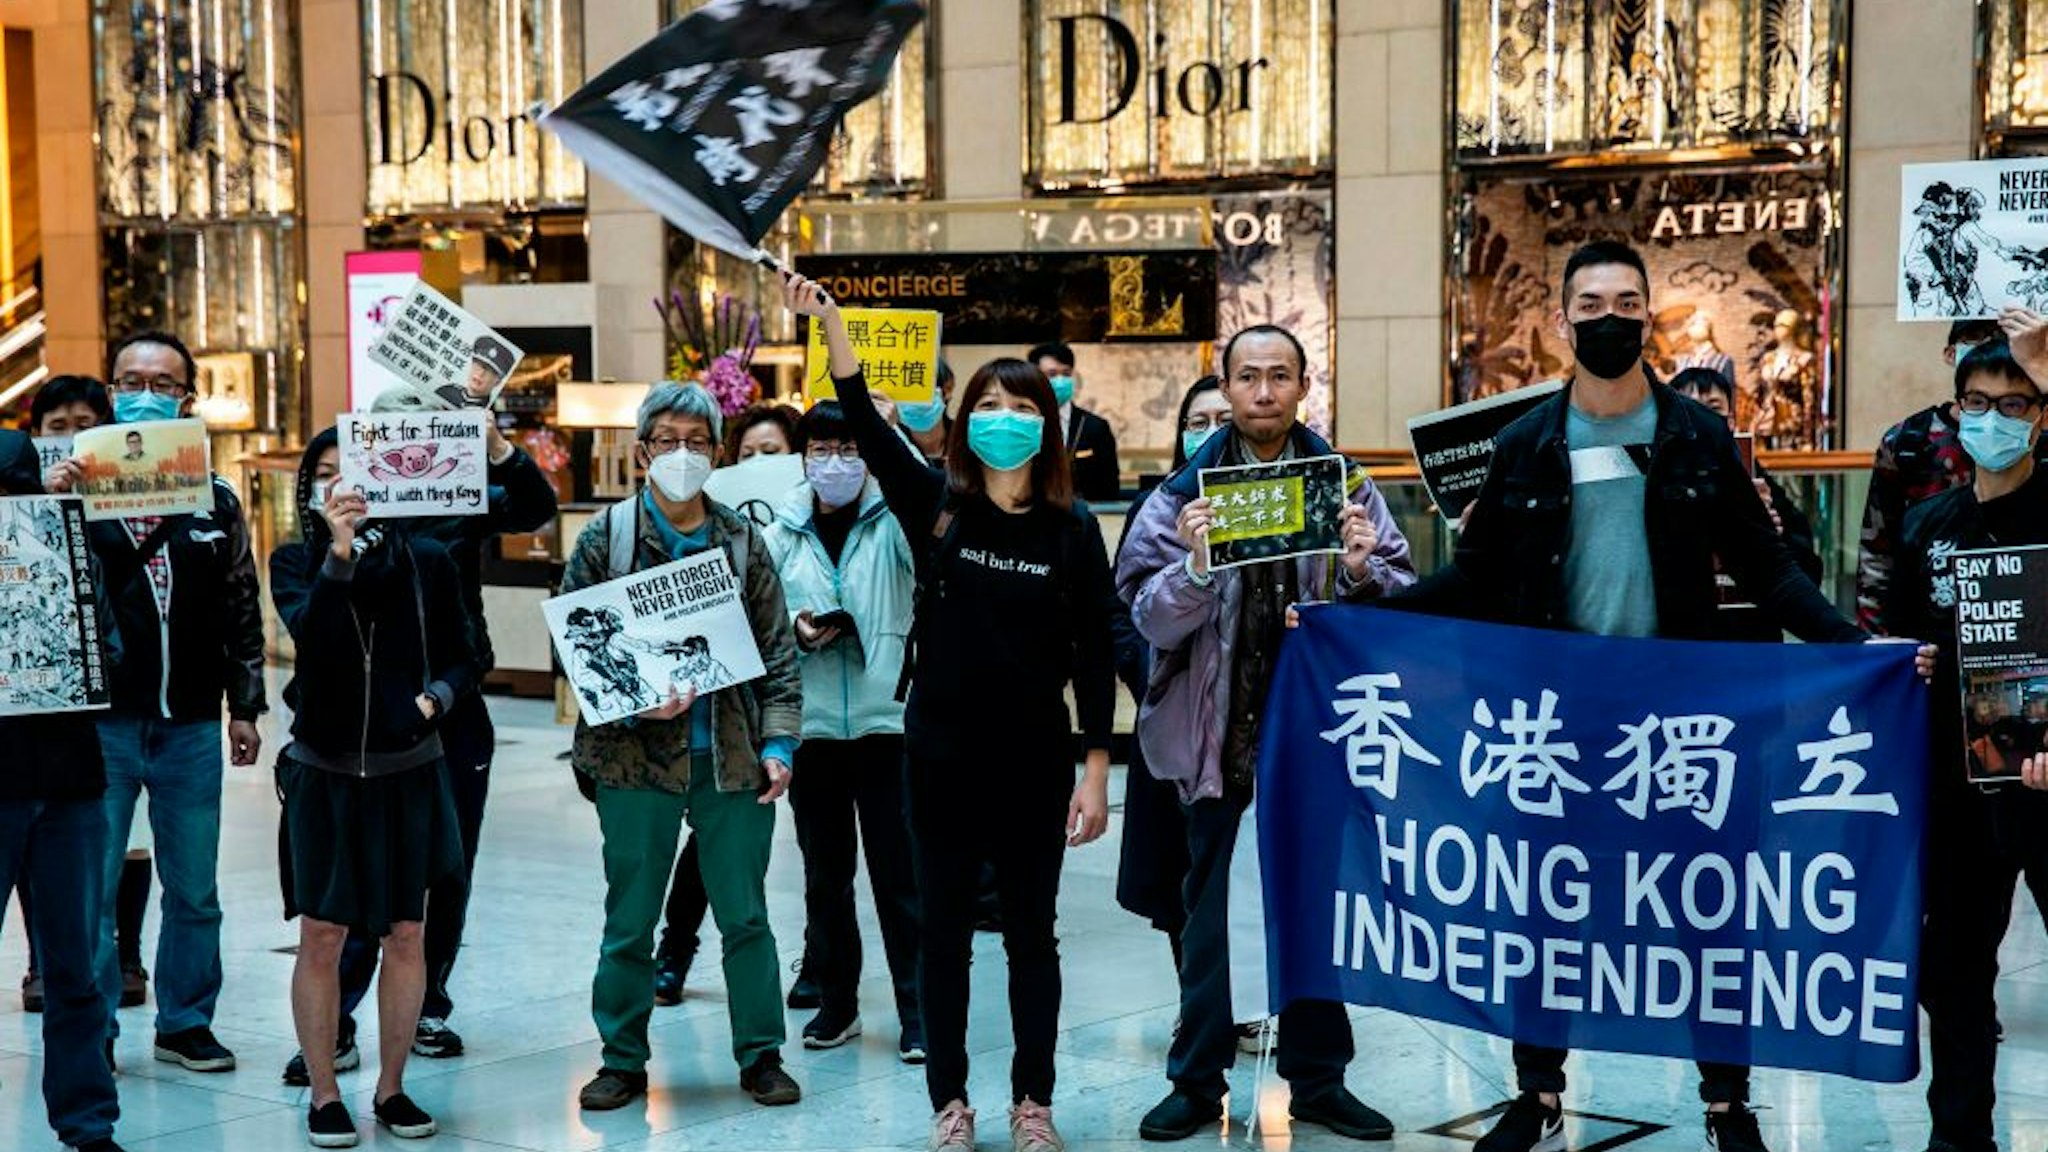 Office workers and protesters gather during a pro-democracy demonstration in a mall in the central district of Hong Kong on February 21, 2020.